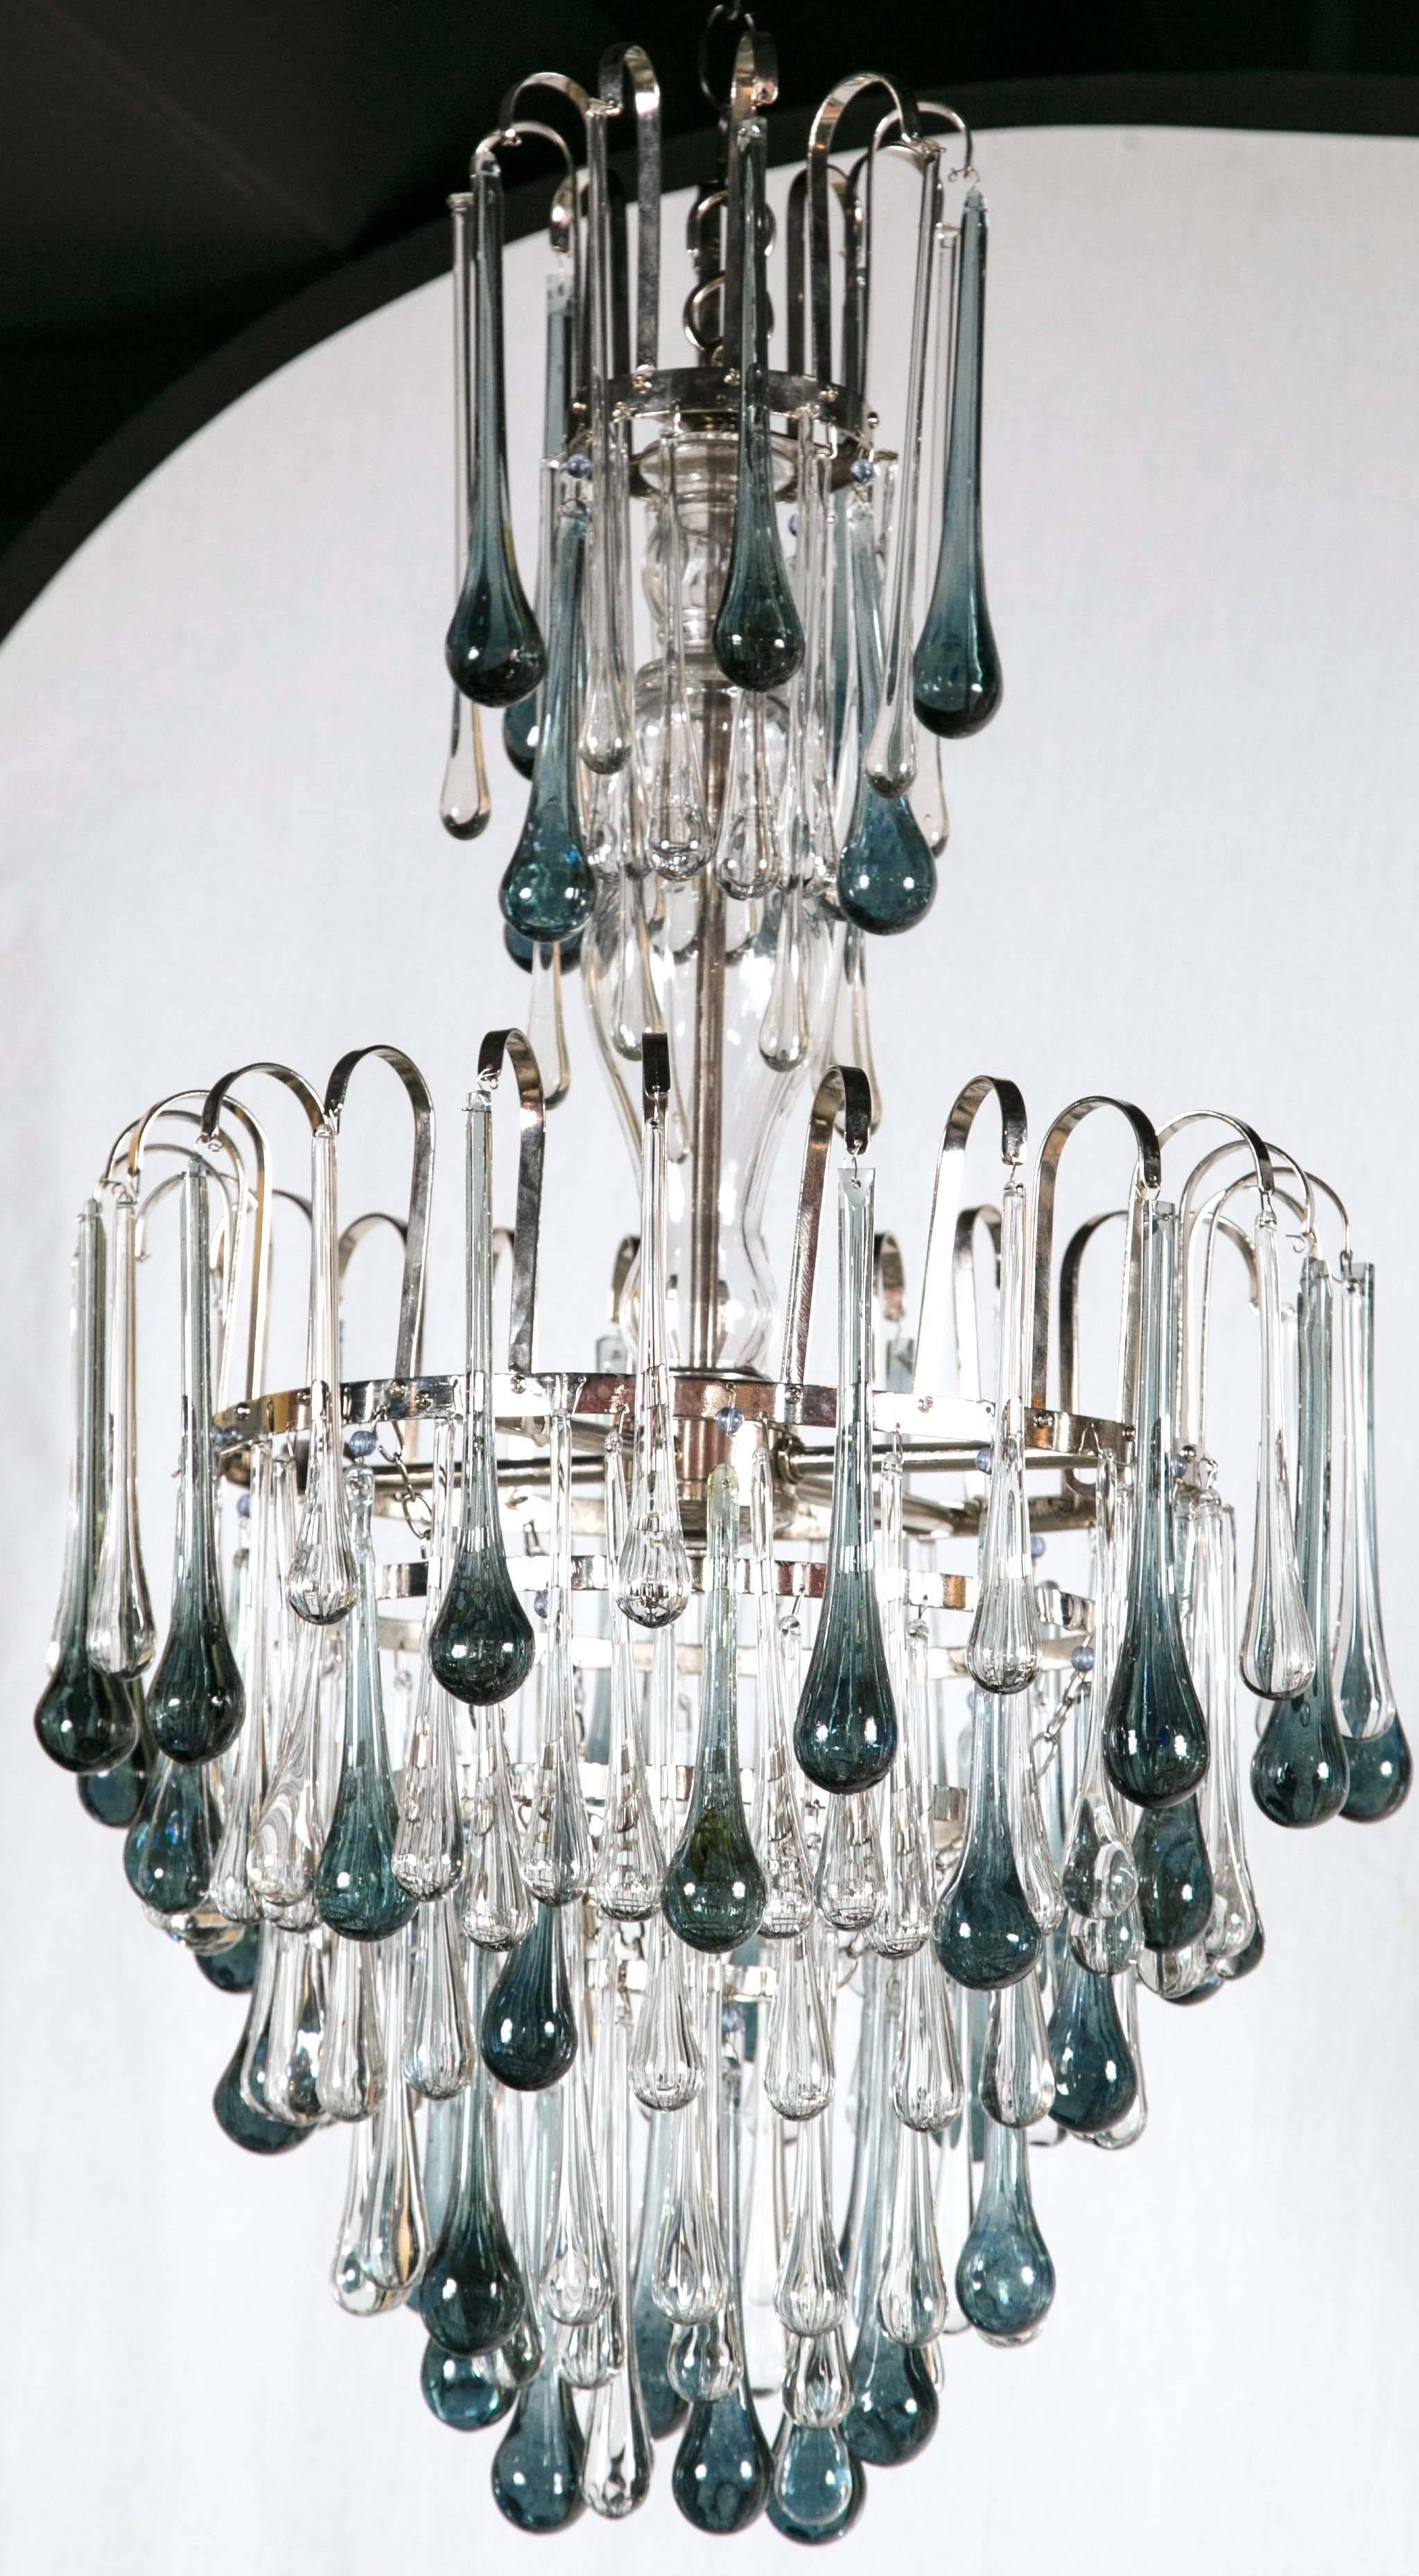 A lovely pair of Murano glass chandeliers with blue colored tear drops, circa 1930. Priced per chandelier.